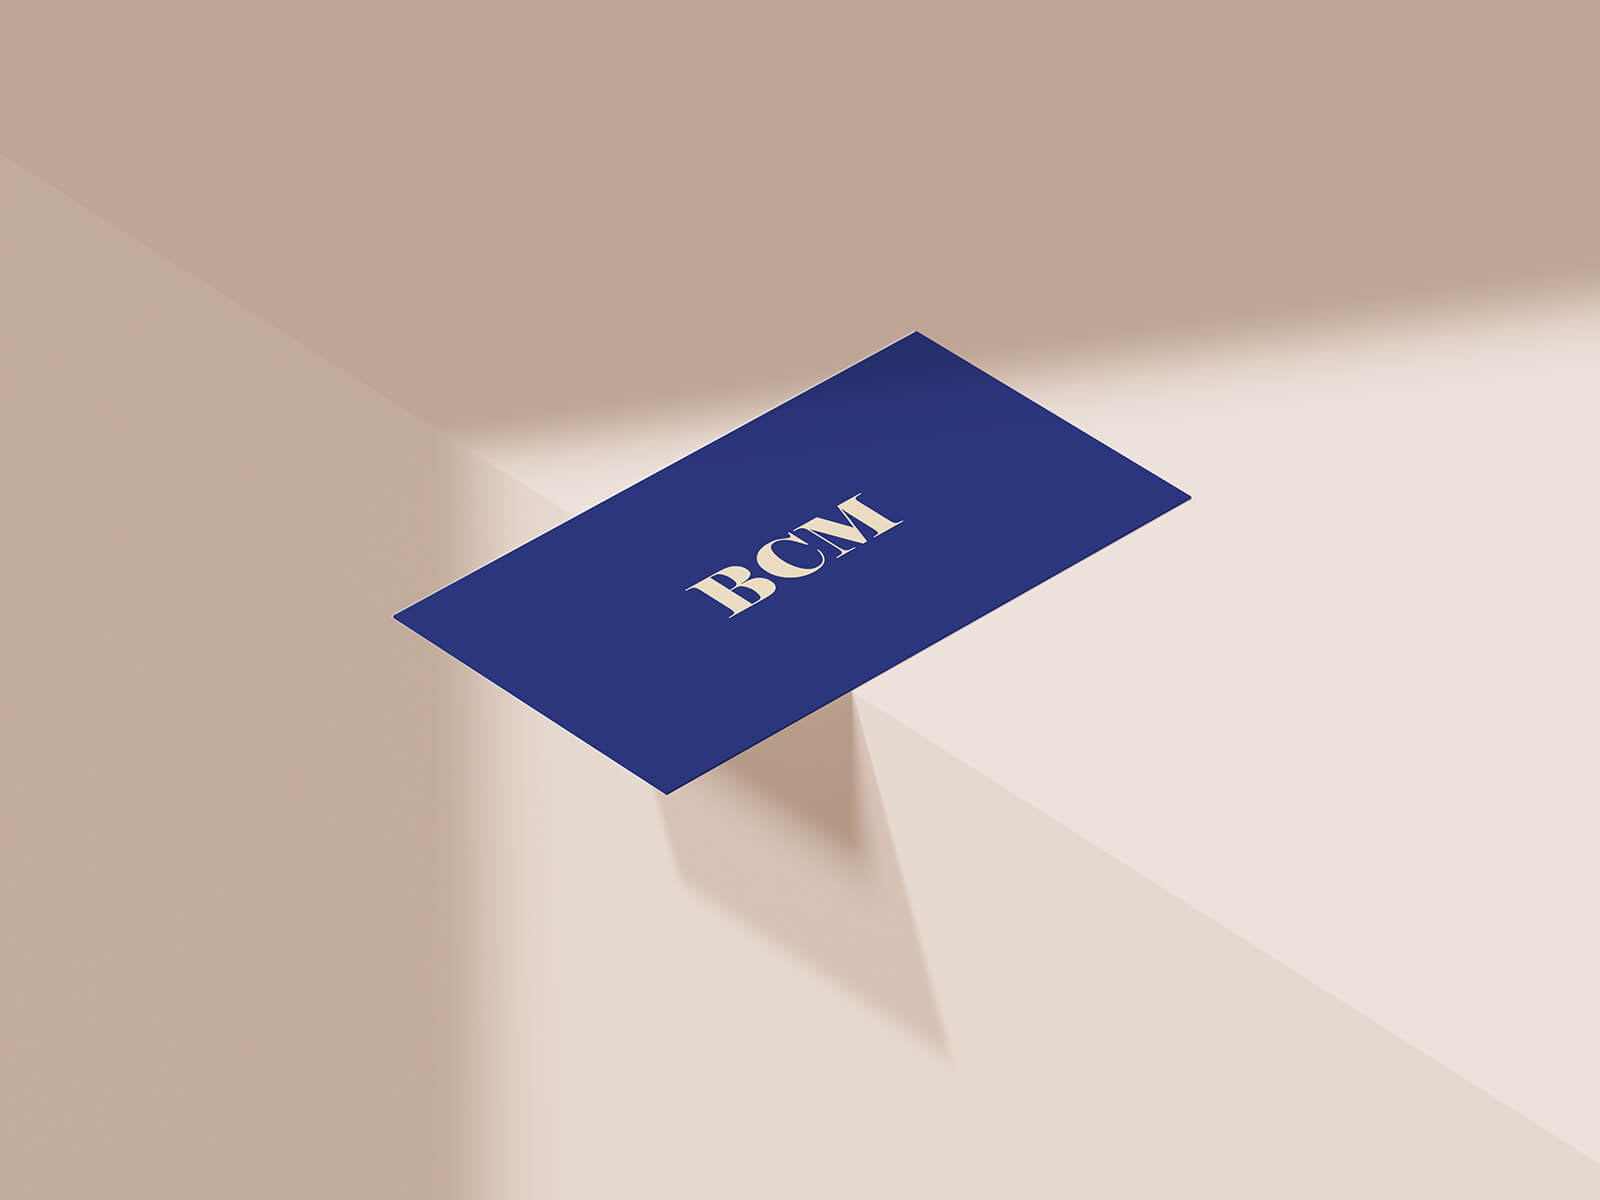 Free Lonely Business Card Mockup PSD